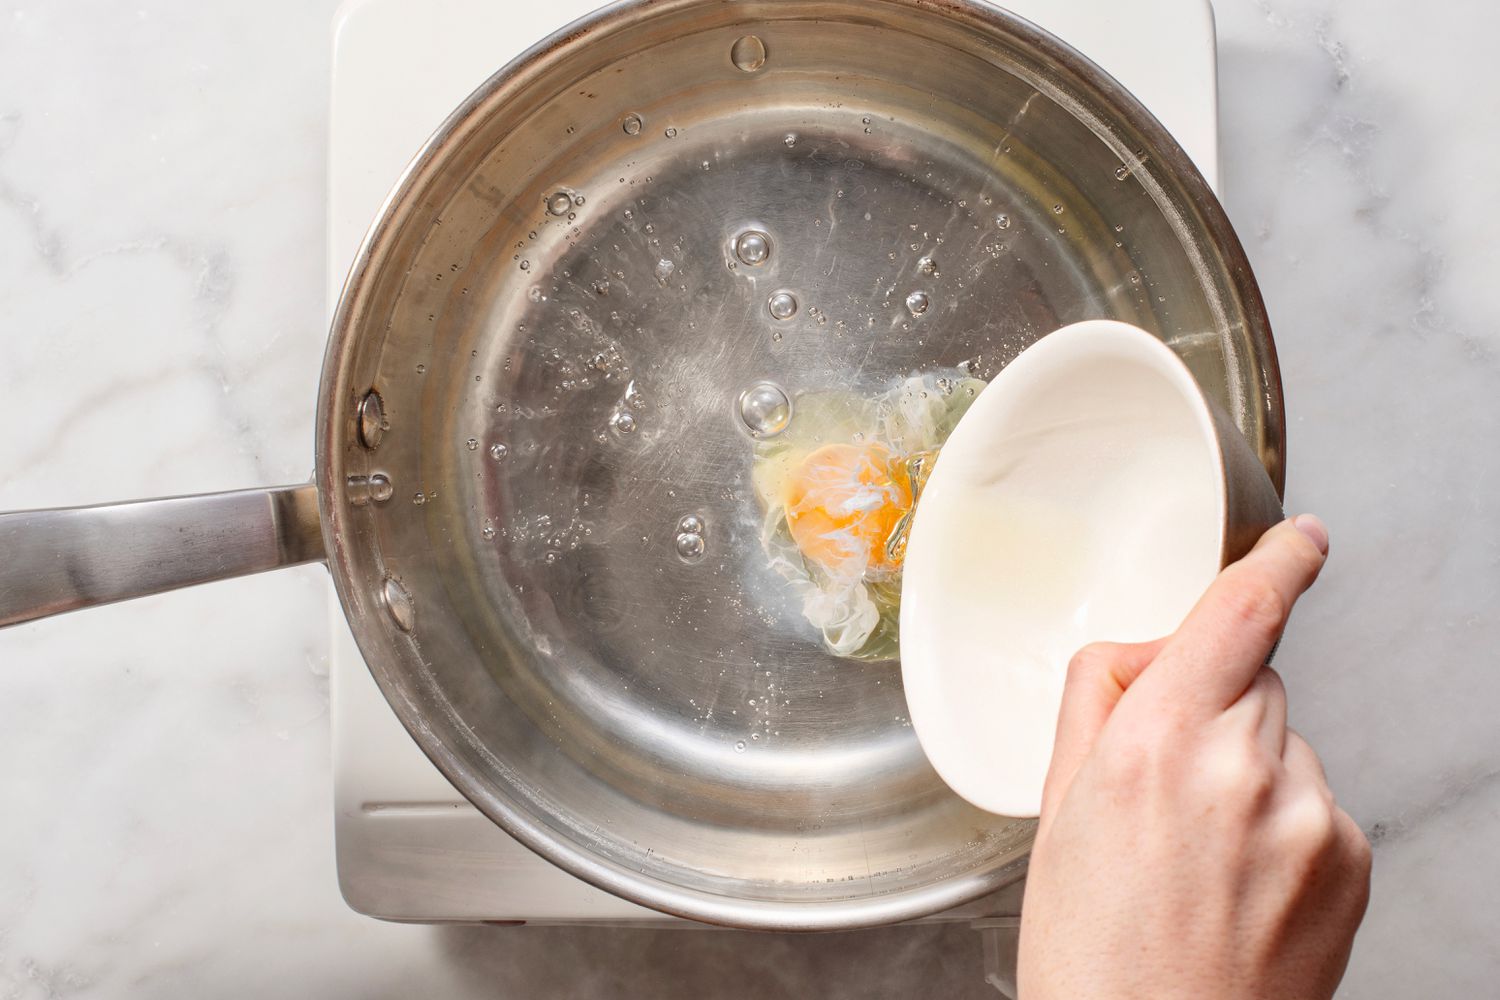 A hand tipping an egg out of a ramekin into the simmering water-vinegar mixture